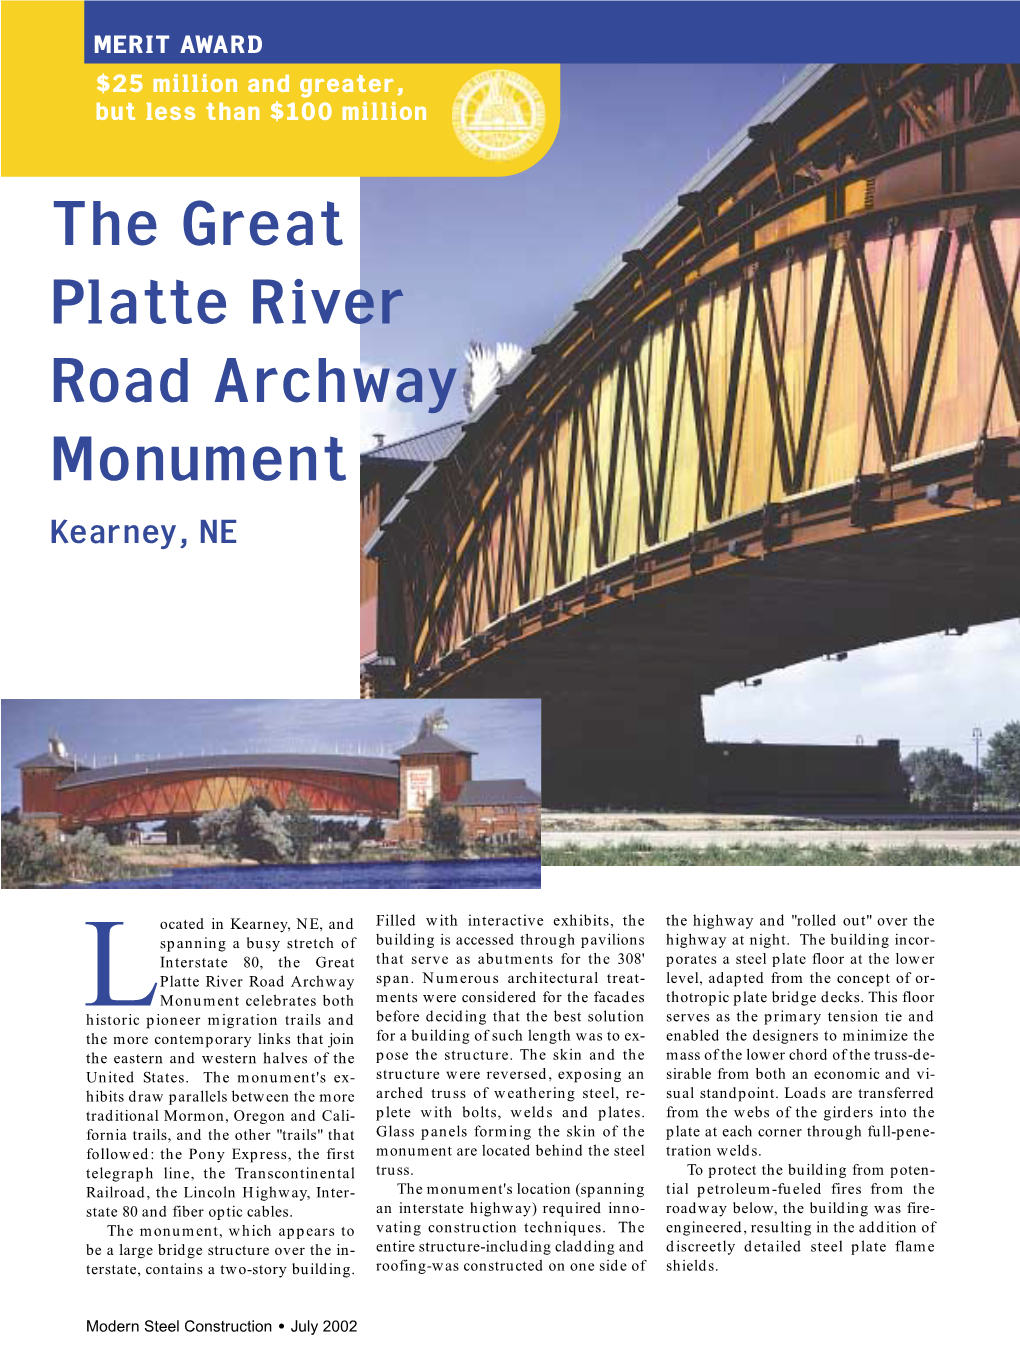 The Great Platte River Road Archway Monument Kearney, NE